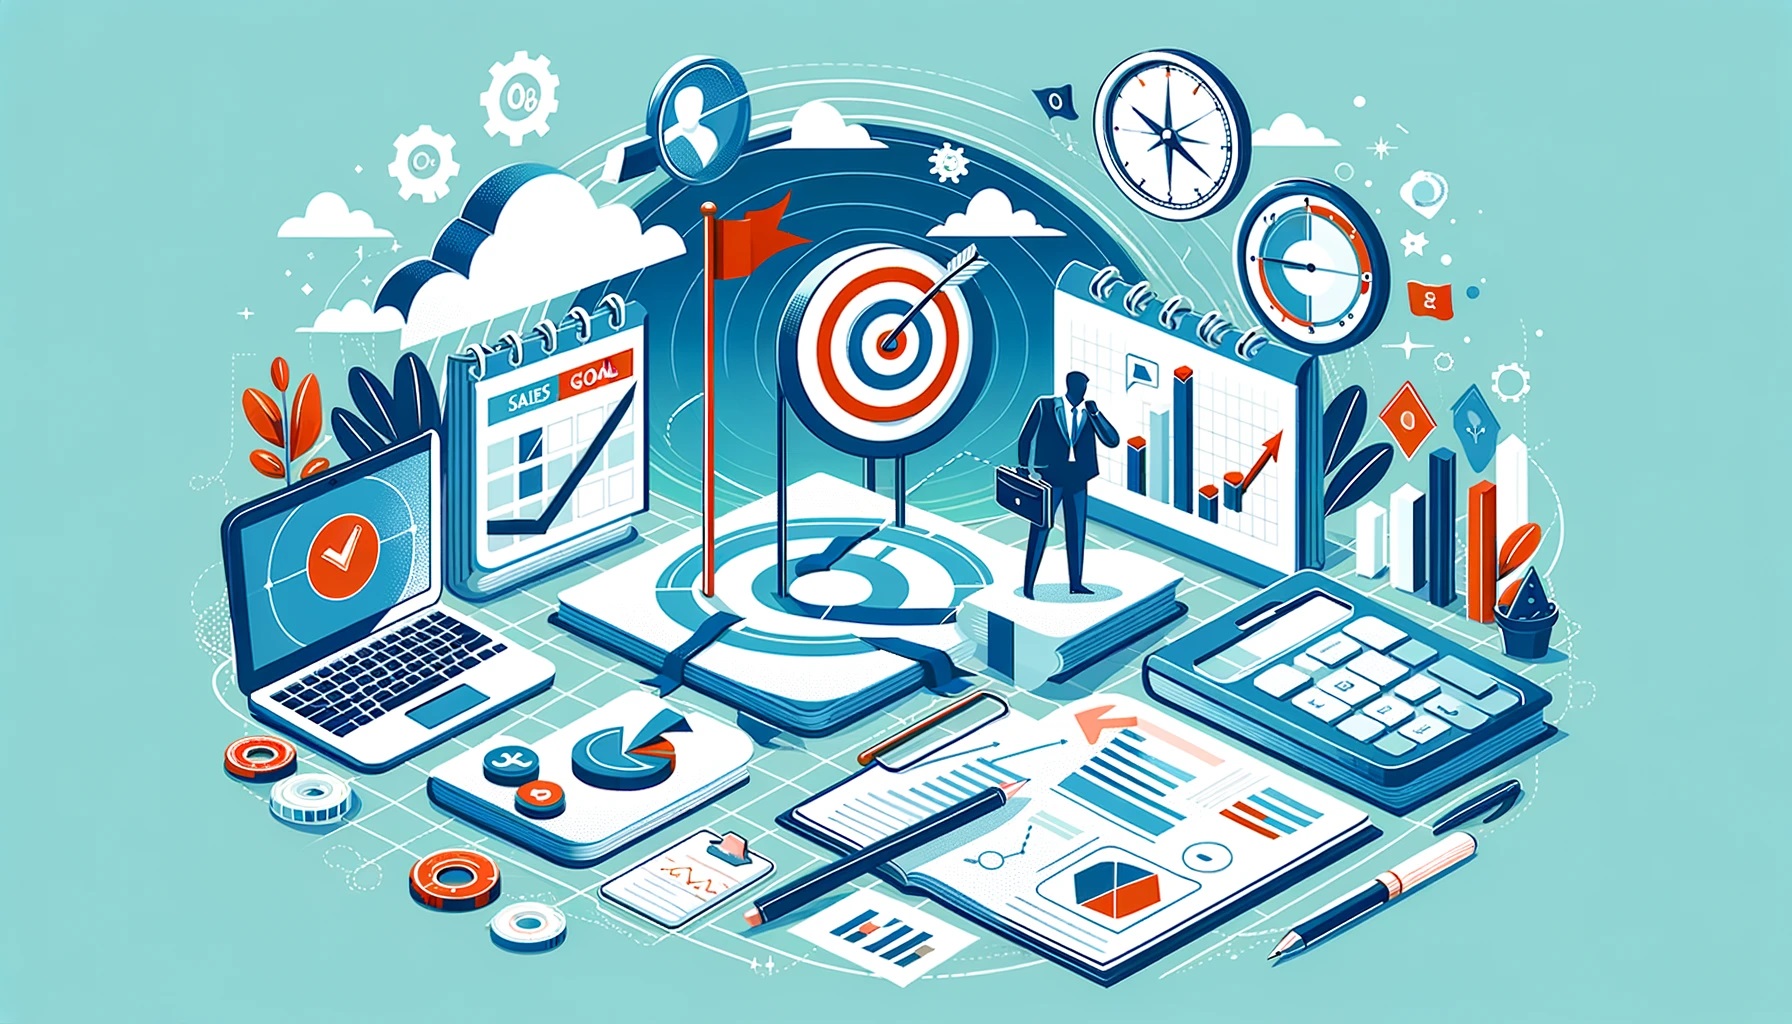 A vibrant and dynamic illustration depicting a businessman analyzing targets and goals amid a landscape of productivity tools, financial charts, and time management symbols, reflecting the complex and interconnected nature of modern business strategy and performance measurement.